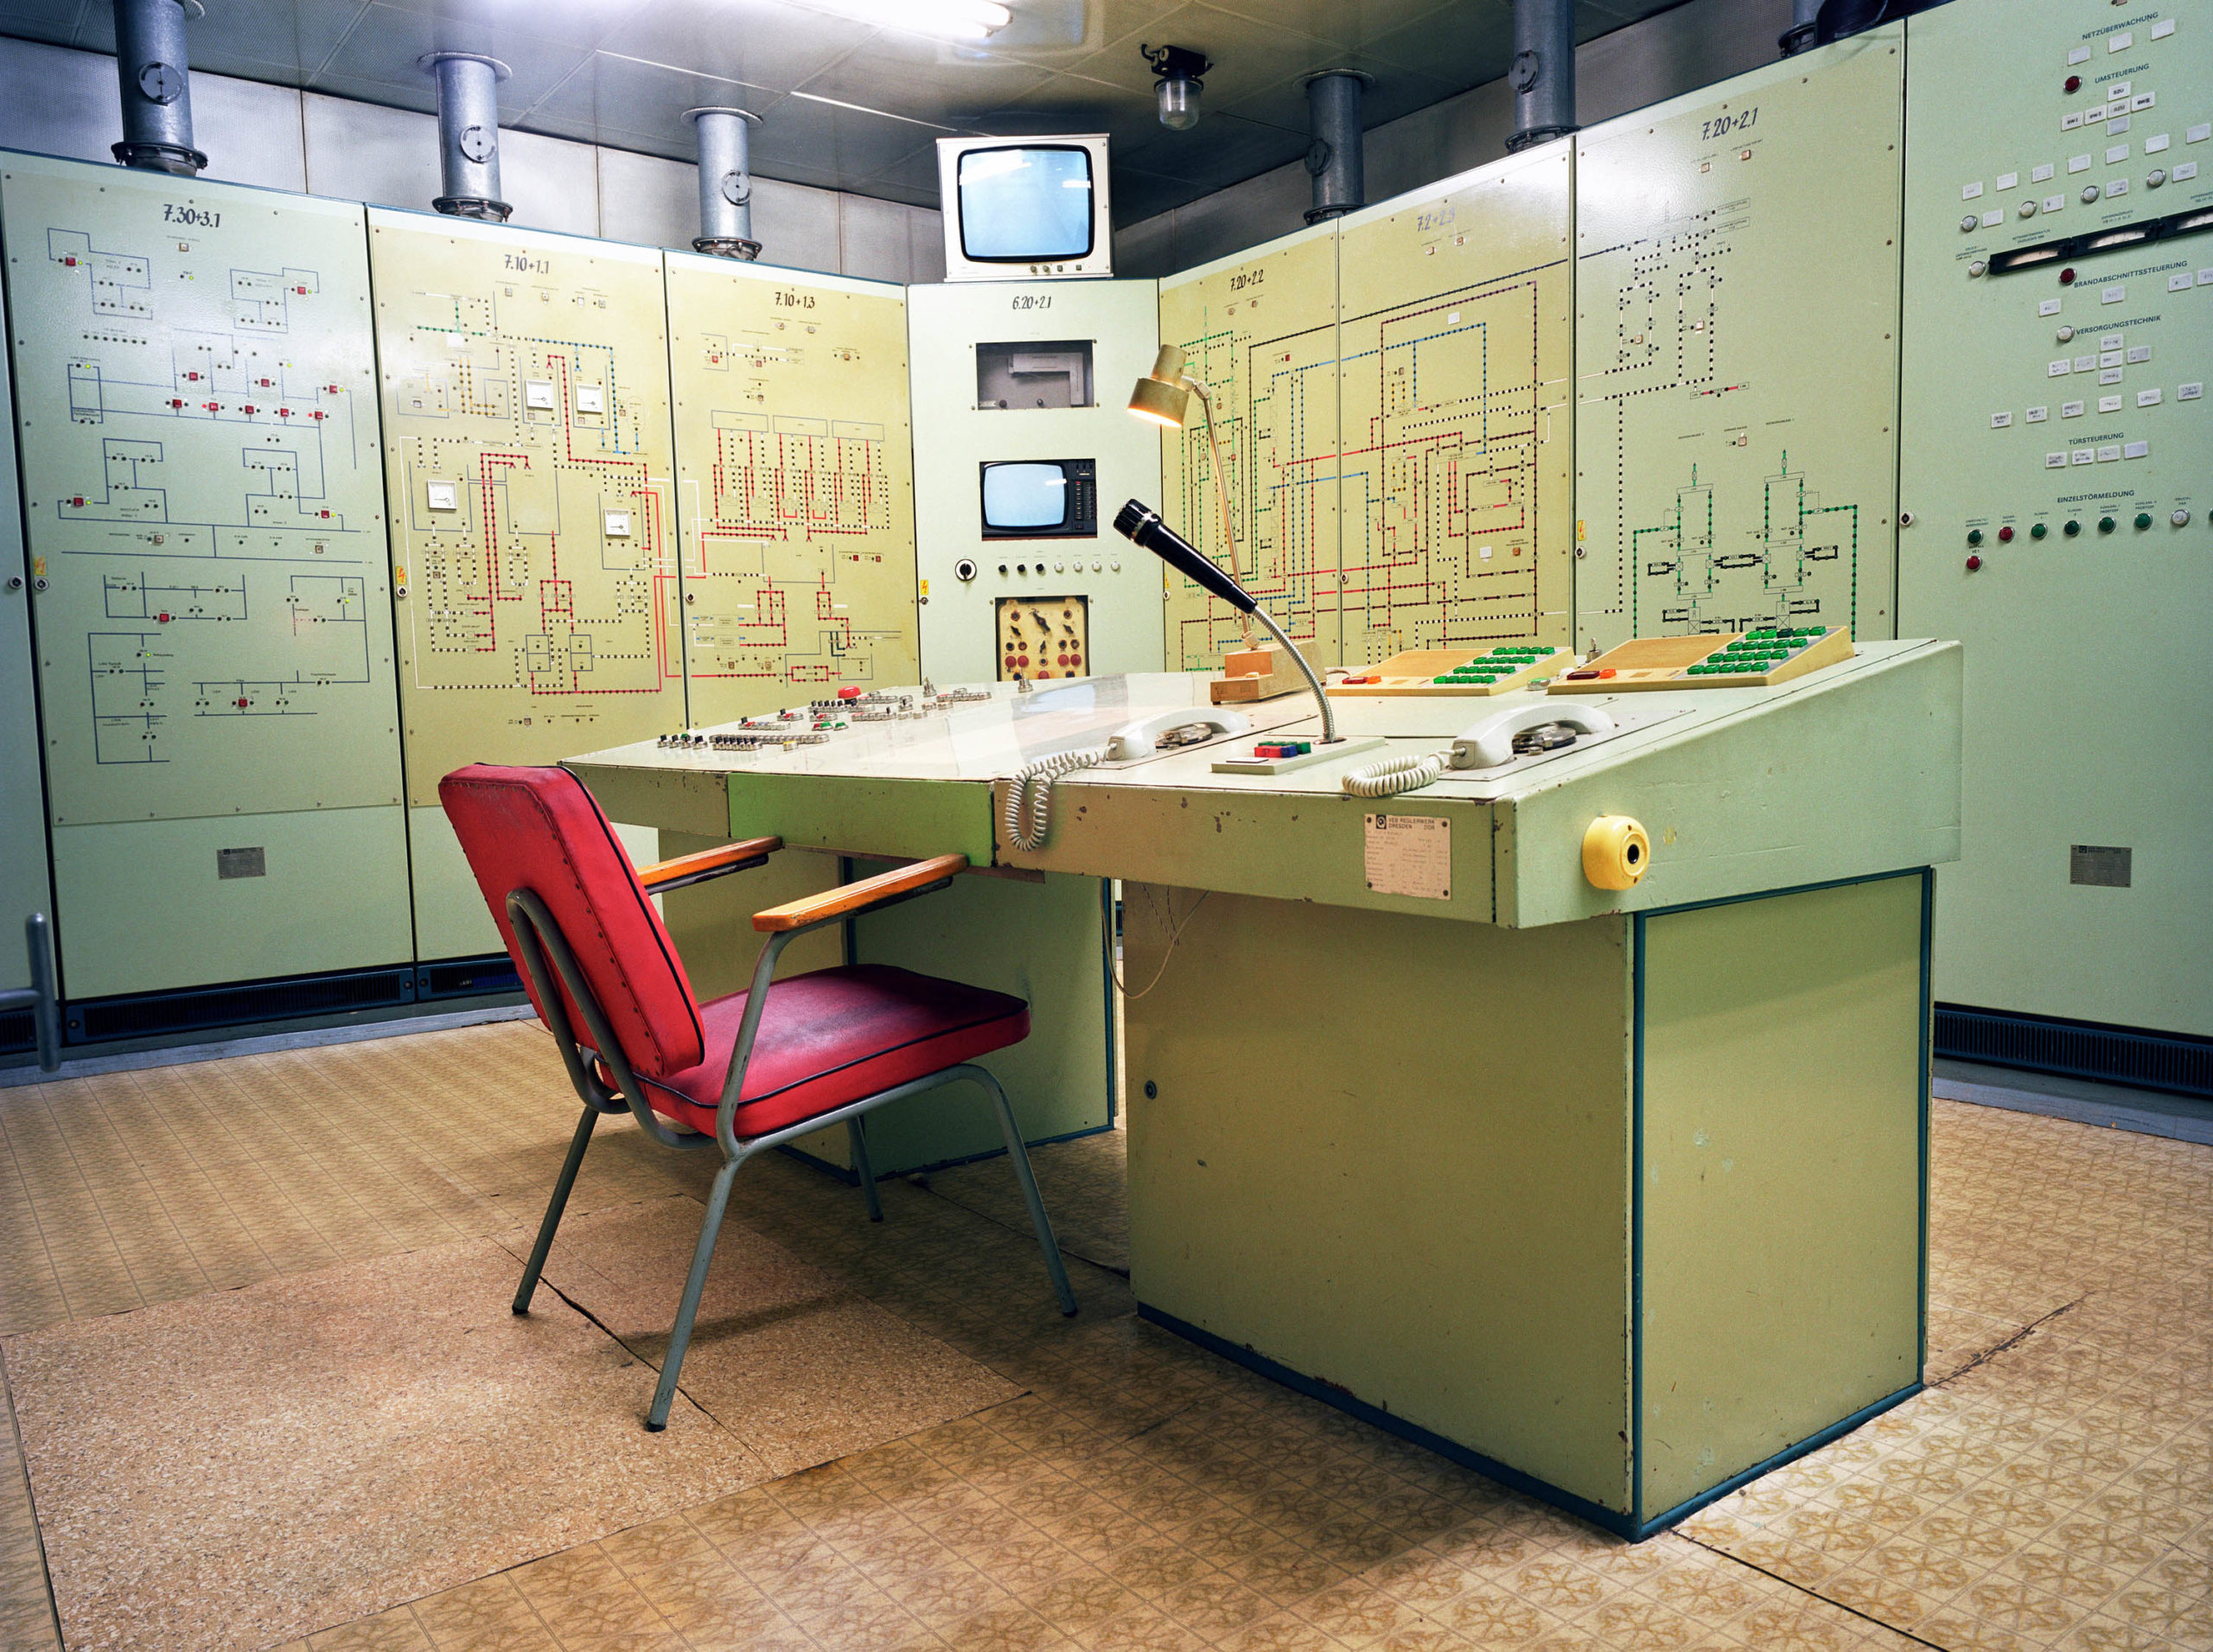 East Germany. Underground communications bunker of the National People’s Army